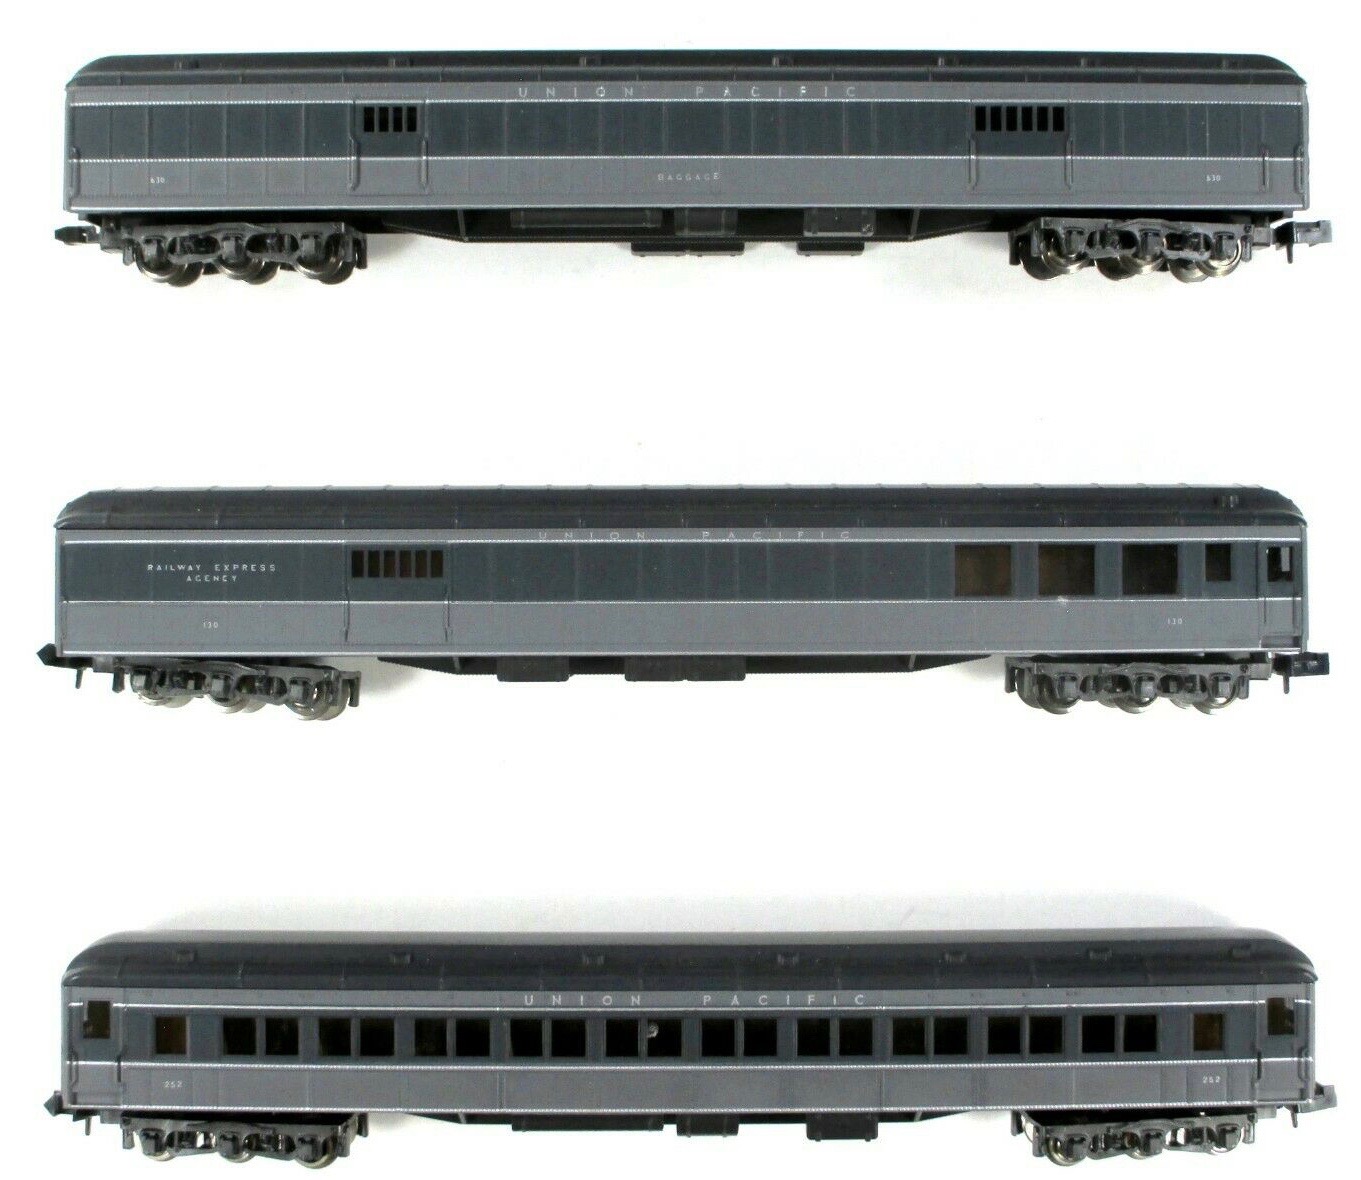 N Scale - Arnold - 0550 - Passenger Car, Heavyweight - Union Pacific